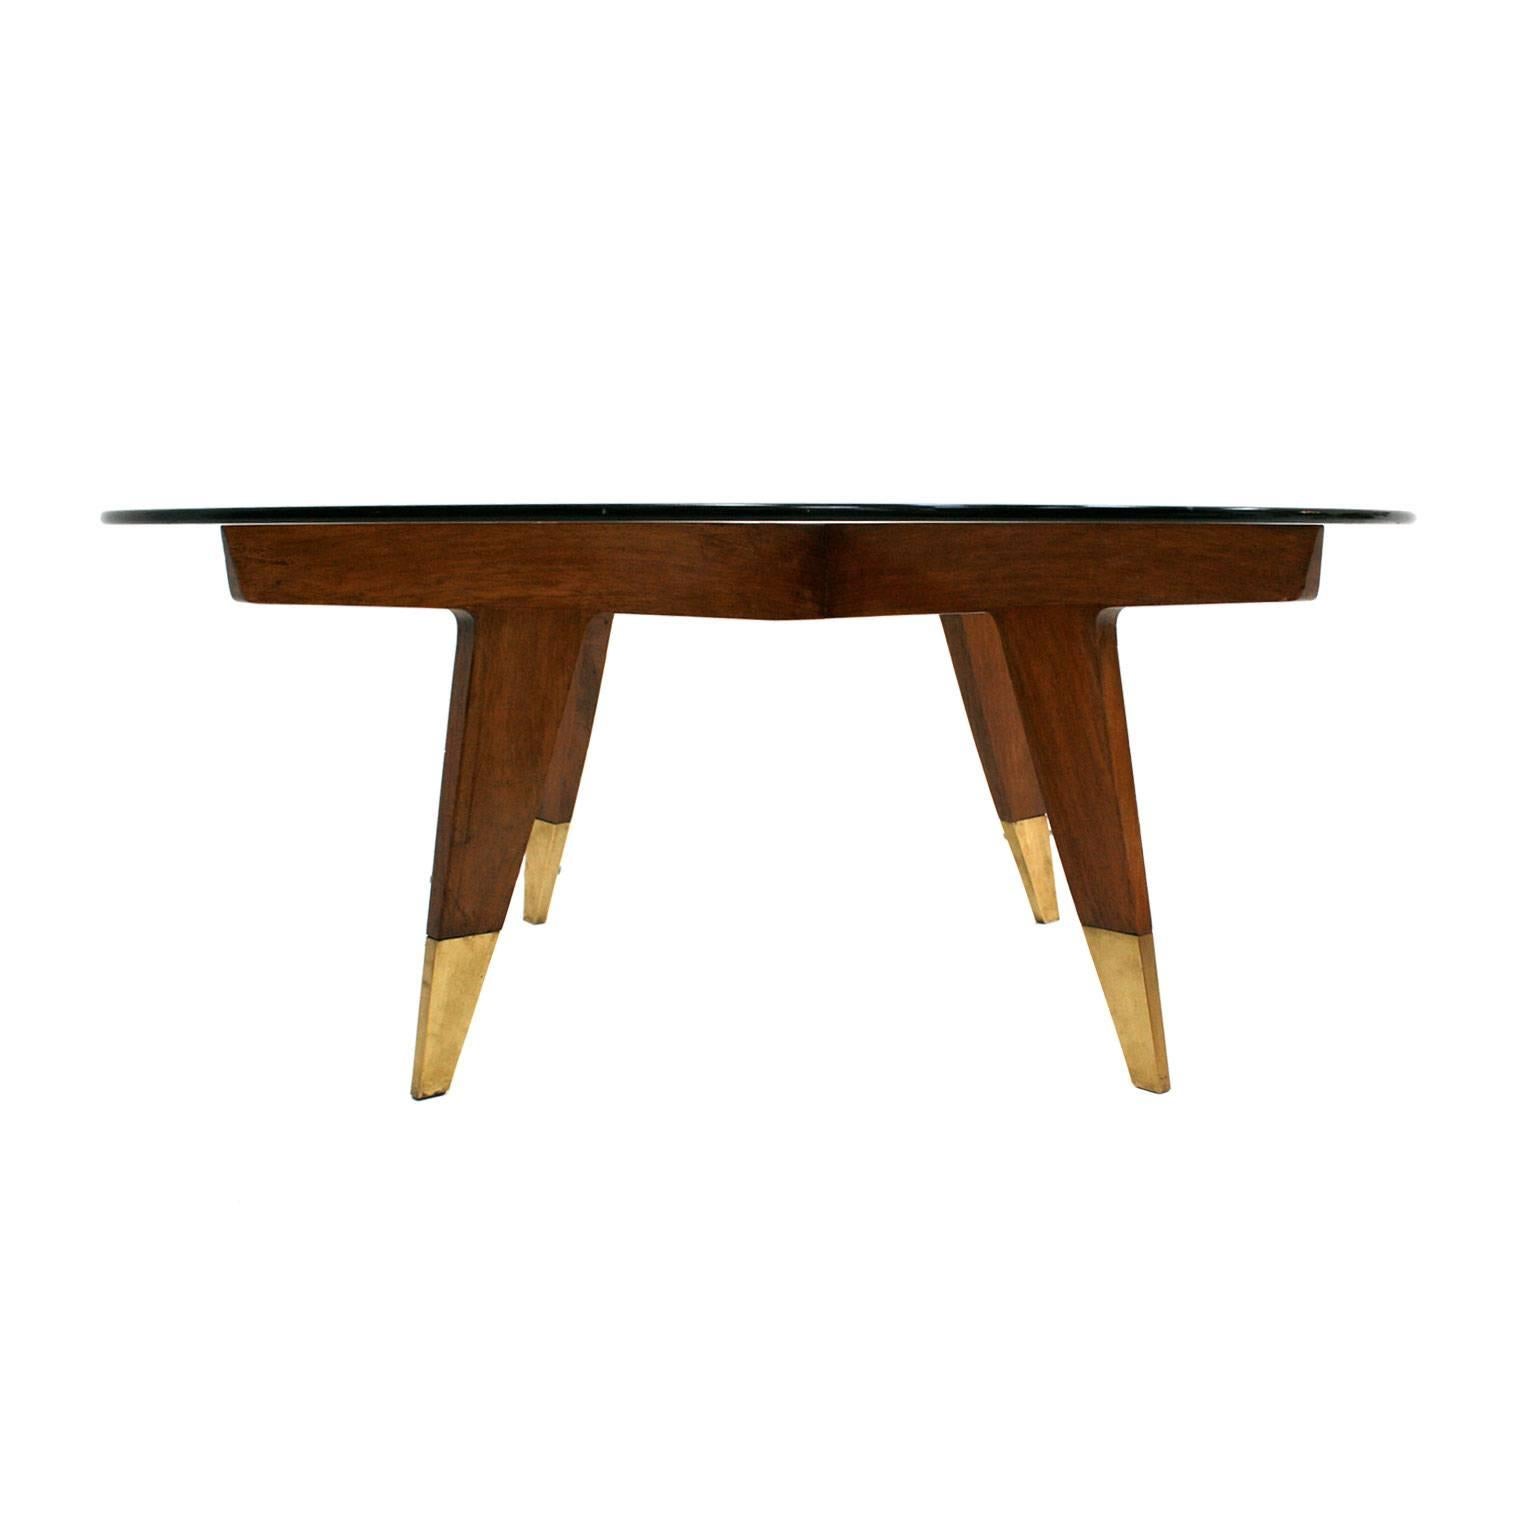 Original Compass cocktail table by Gio Ponti for singer and sons made in walnut, terminating with brass sabots.